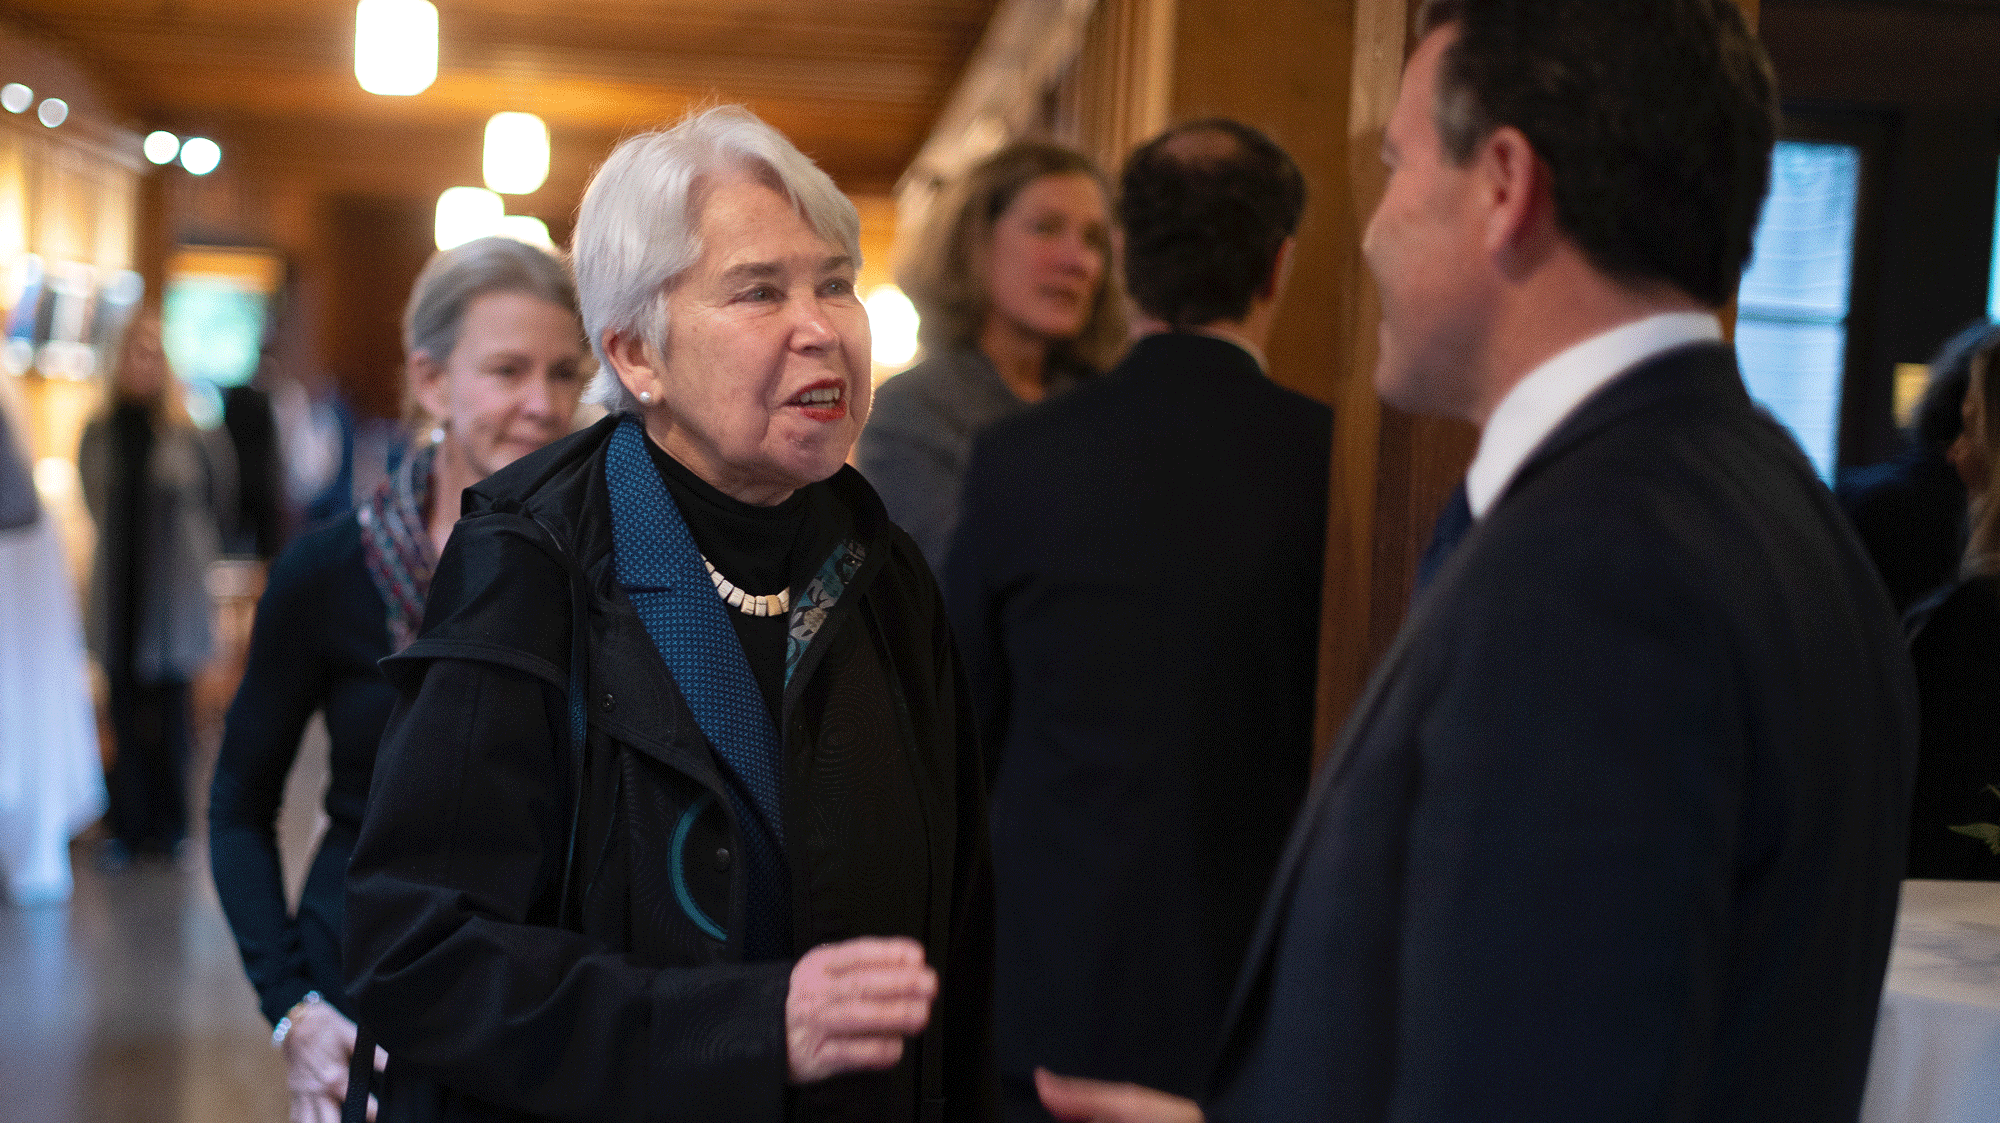 UC Berkeley Chancellor Carol T. Christ with a guest at the memorial service of former UC President David Pierpont Gardner